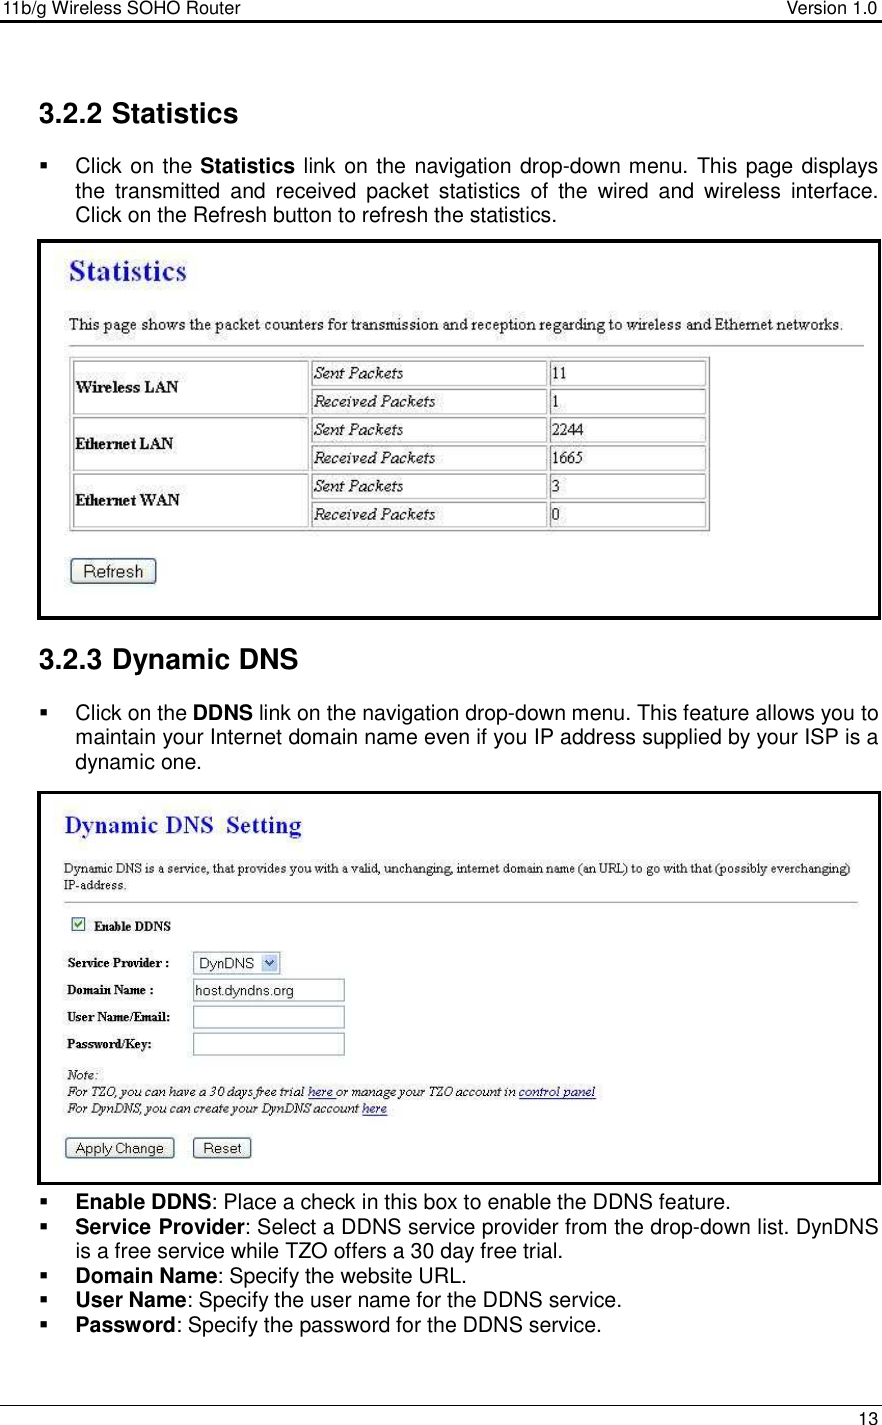 11b/g Wireless SOHO Router                                     Version 1.0    13   3.2.2 Statistics   Click on the Statistics link on the navigation drop-down menu. This page displays the  transmitted  and  received  packet  statistics  of  the  wired  and  wireless  interface.  Click on the Refresh button to refresh the statistics.                       3.2.3 Dynamic DNS    Click on the DDNS link on the navigation drop-down menu. This feature allows you to maintain your Internet domain name even if you IP address supplied by your ISP is a dynamic one.                    Enable DDNS: Place a check in this box to enable the DDNS feature.  Service Provider: Select a DDNS service provider from the drop-down list. DynDNS is a free service while TZO offers a 30 day free trial.  Domain Name: Specify the website URL.  User Name: Specify the user name for the DDNS service.  Password: Specify the password for the DDNS service.   